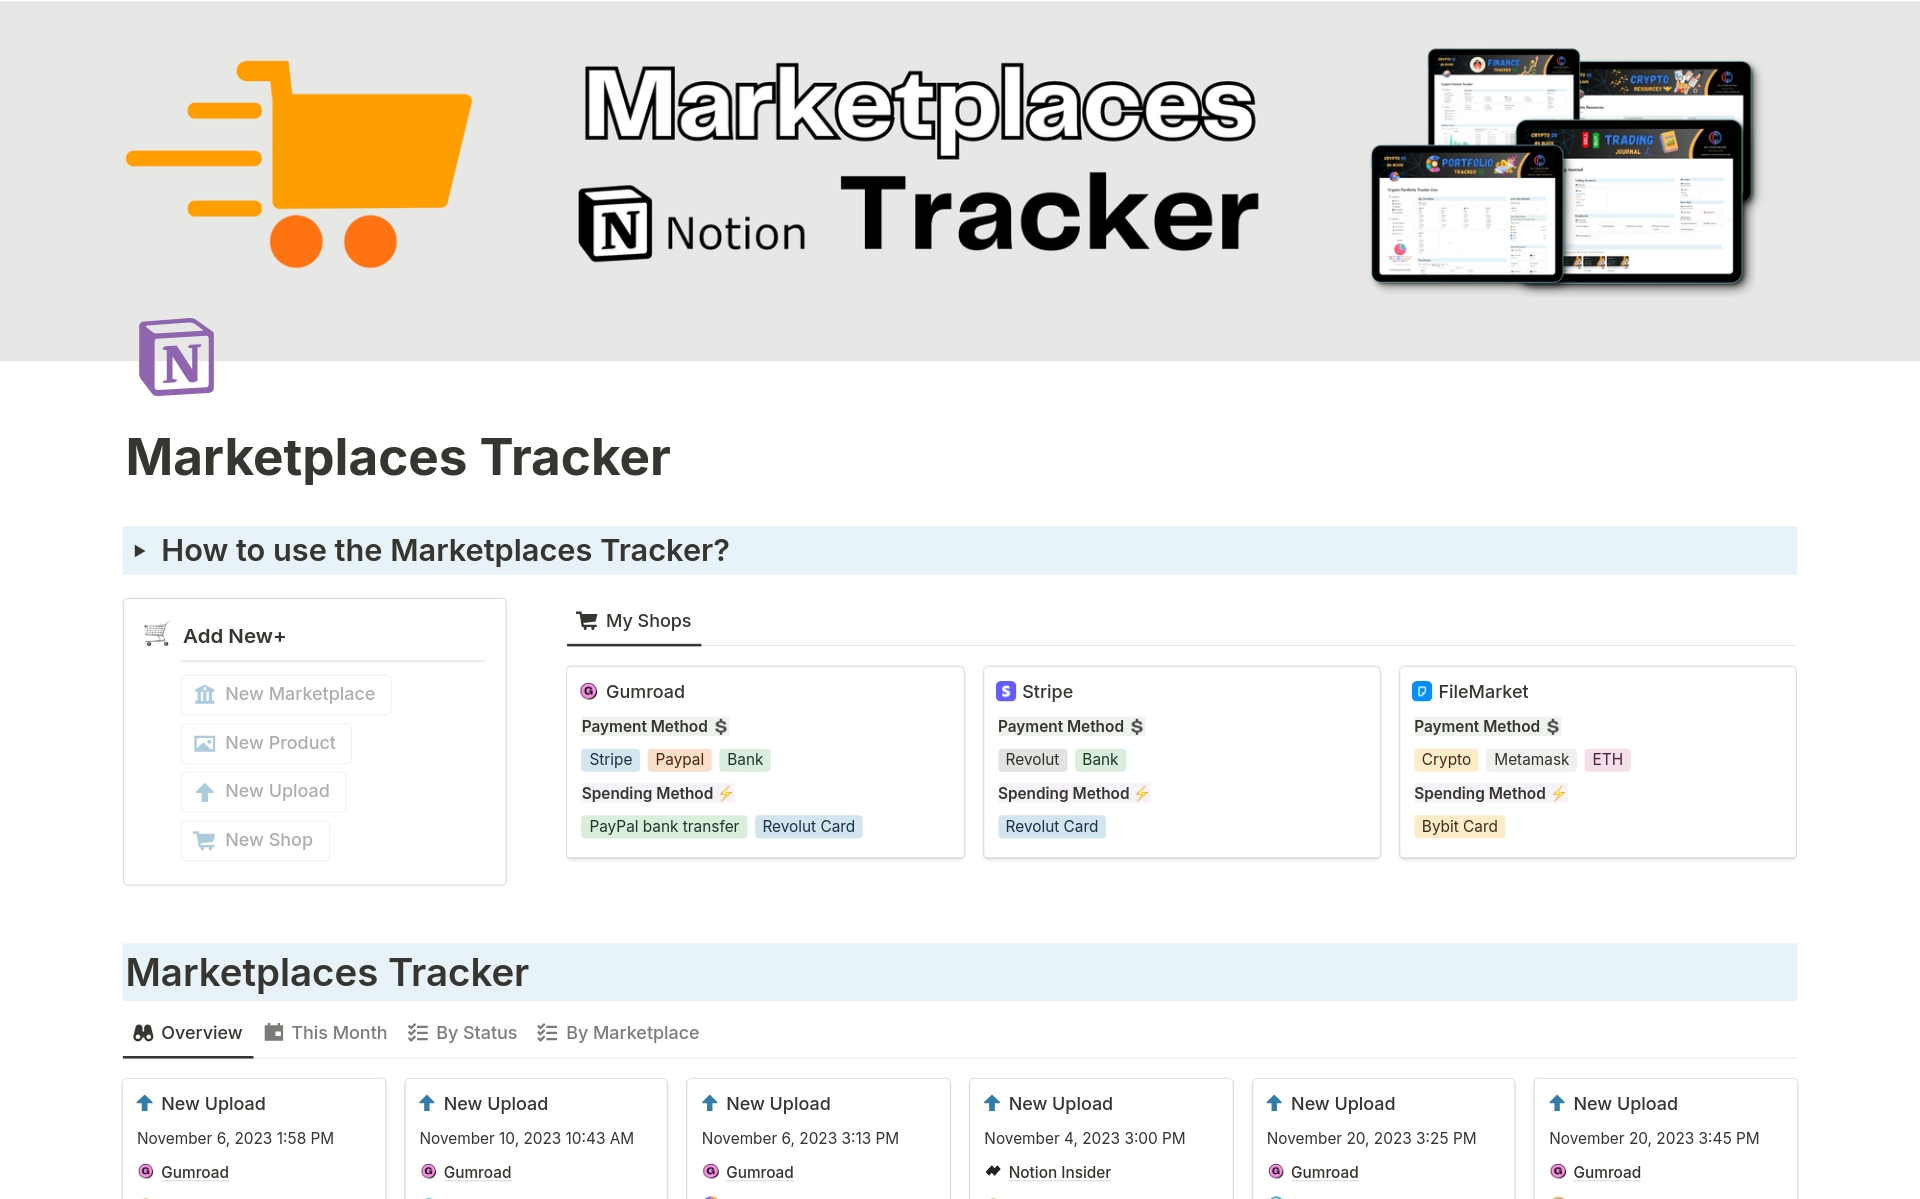 Tame The Notion Marketplaces Jungle!

Tired of chasing your uploads across all Notion marketplaces? 

Not knowing if it's accepted or not? Losing track of uploads?

The Notion Marketplace Tracker puts you in control!